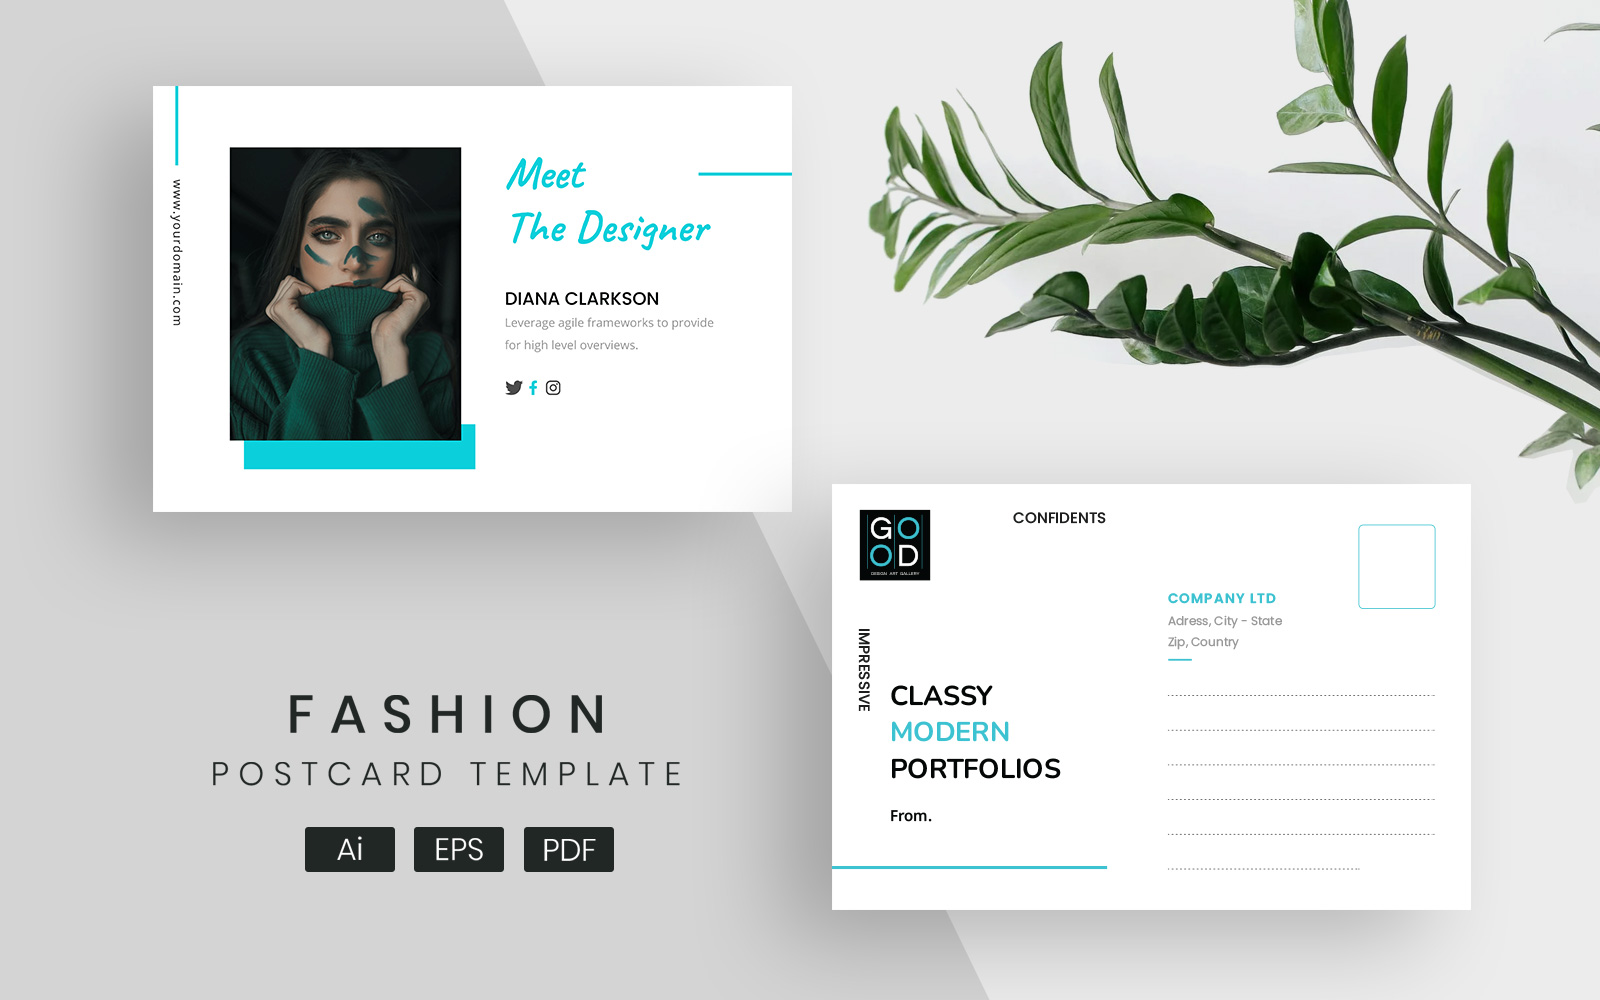 Modern and Classy Post Сard Corporate identity template